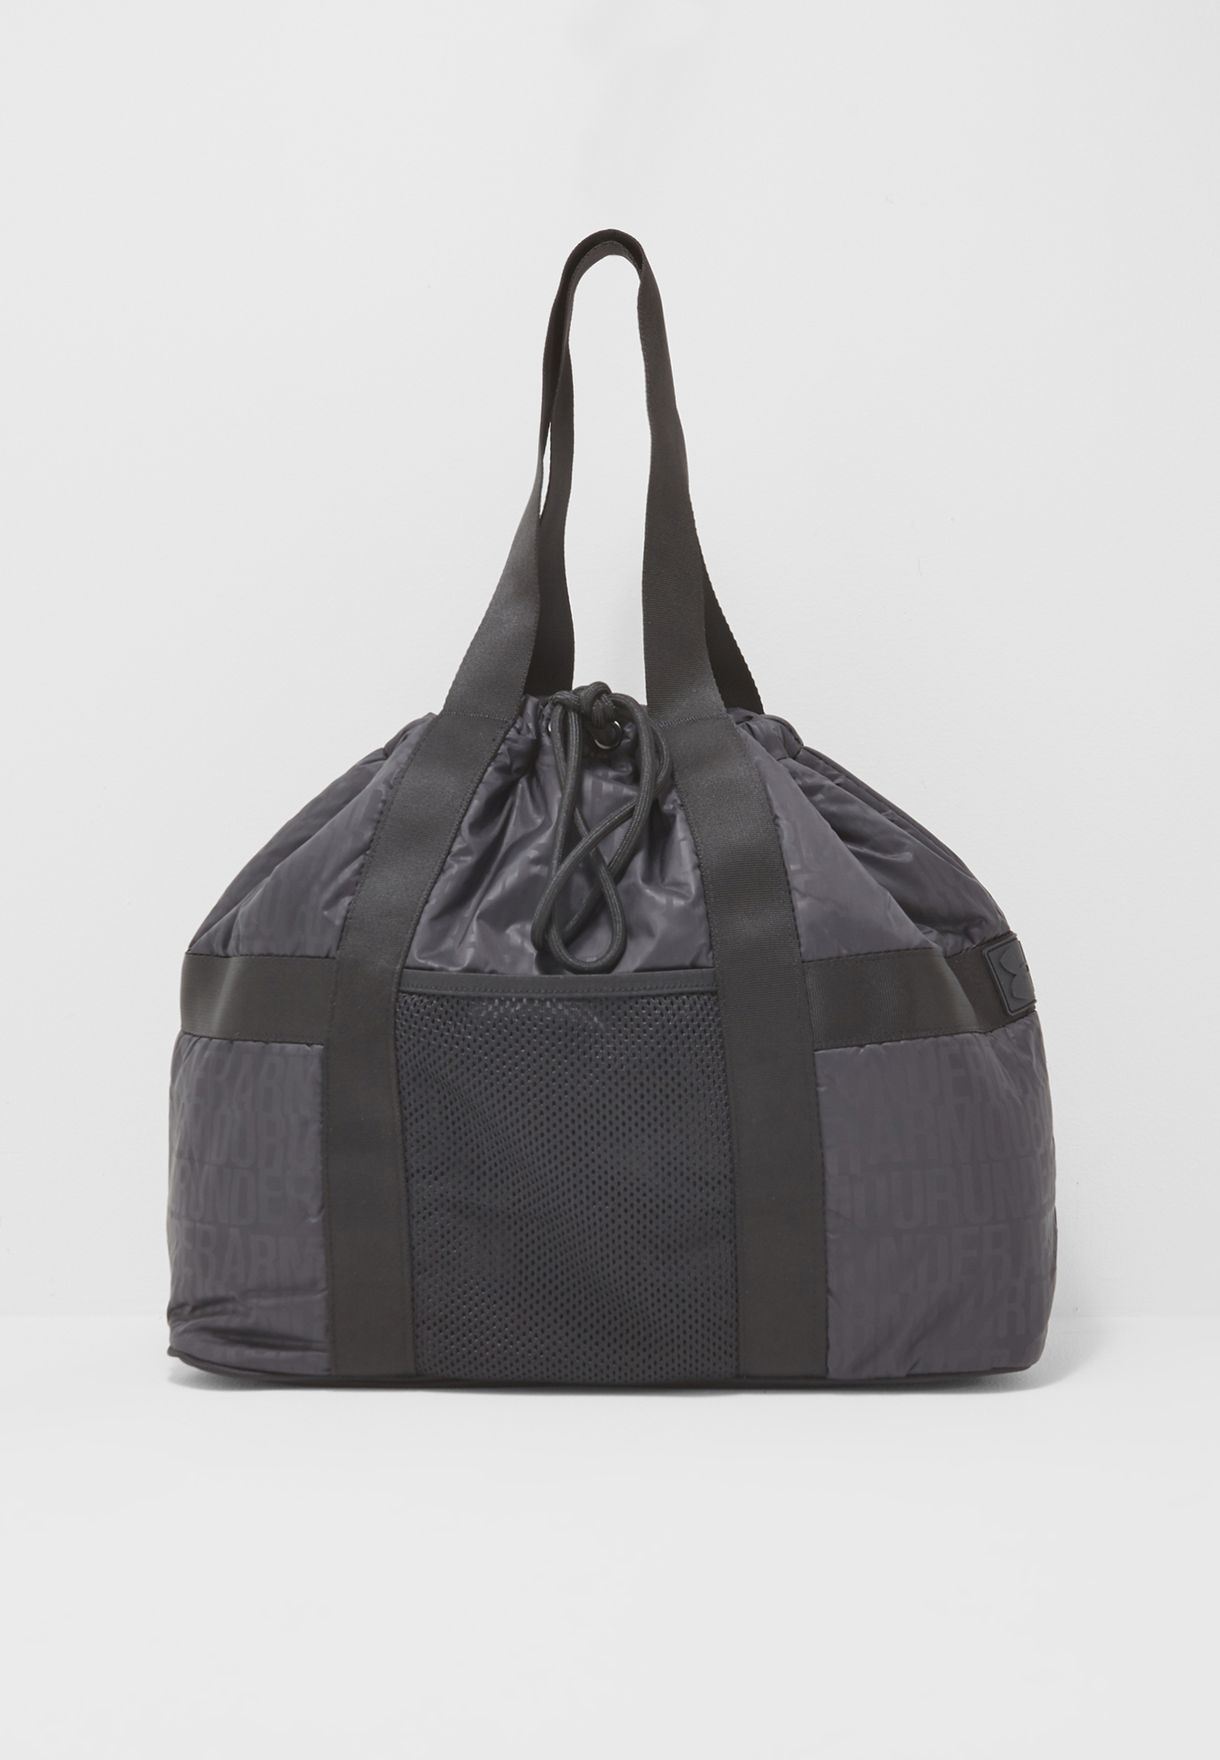 under armour all day tote bag